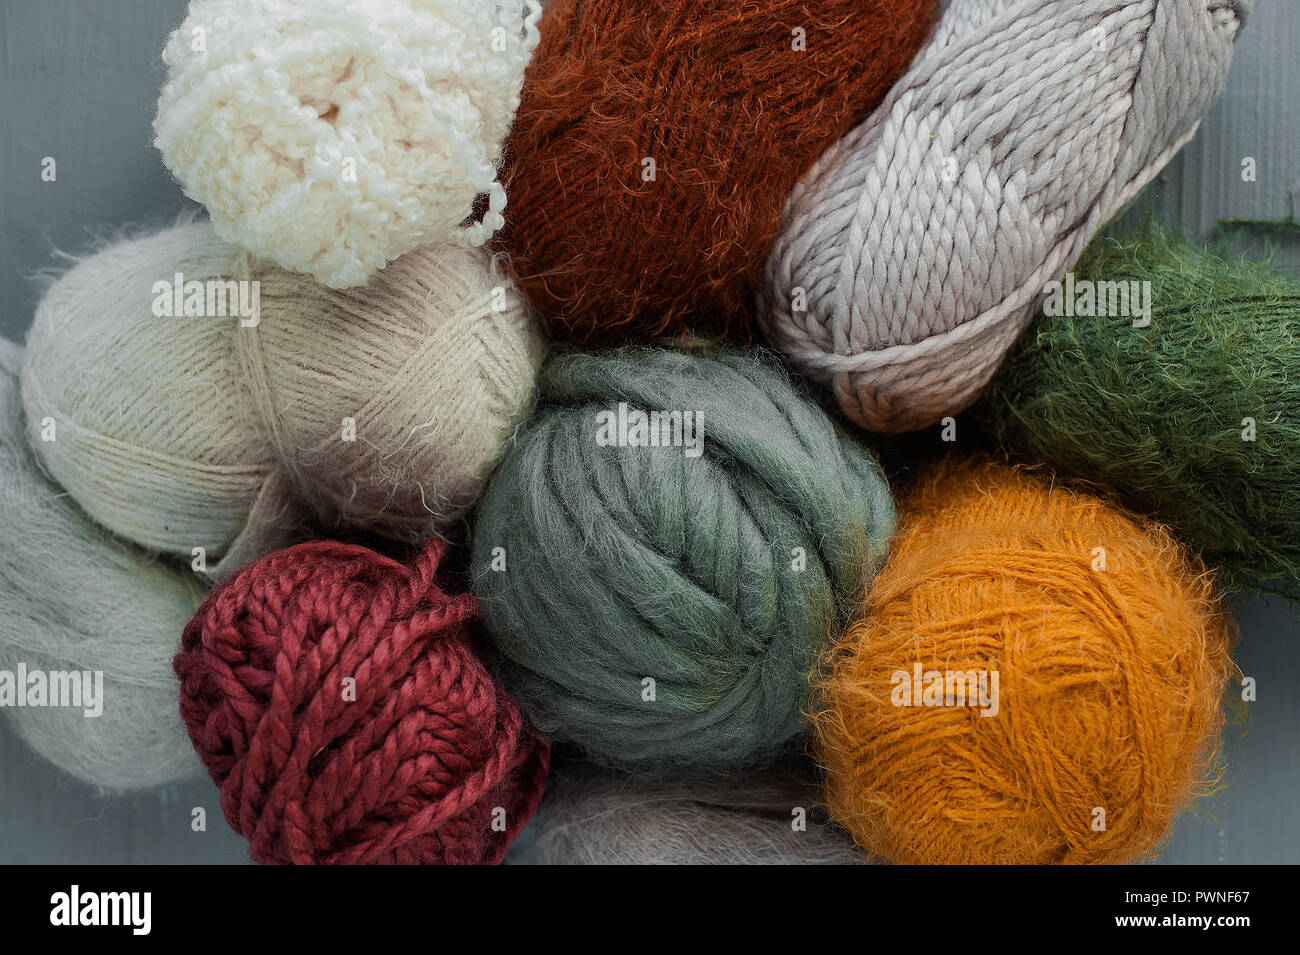 Variety of knitting yarns on grey background. Top view Stock Photo